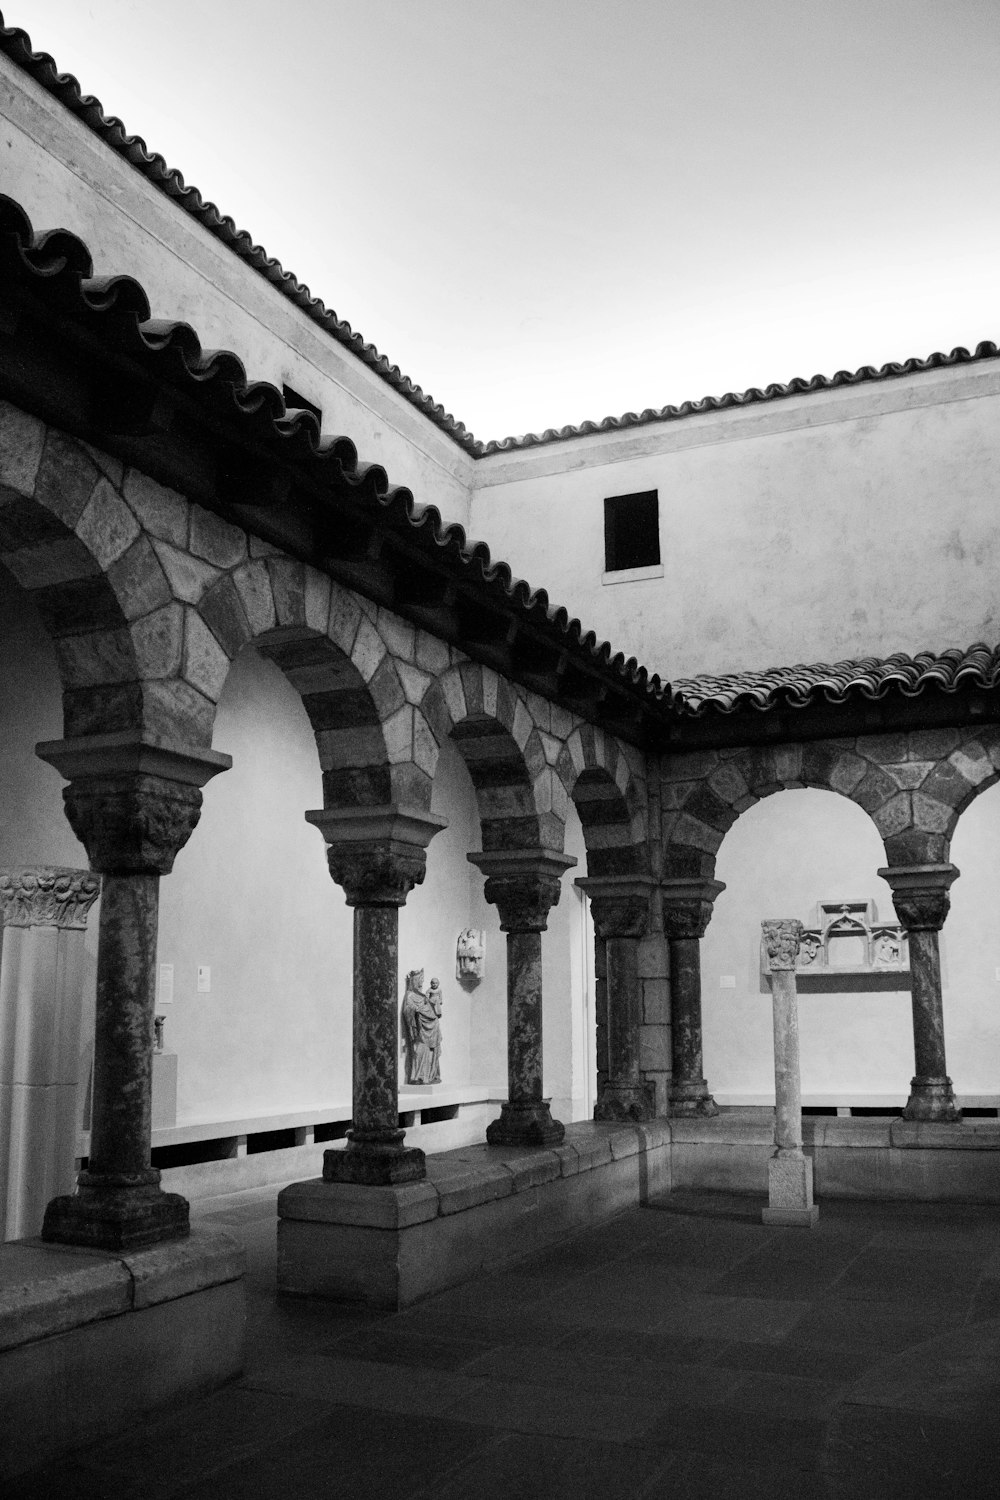 a black and white photo of a building with arches